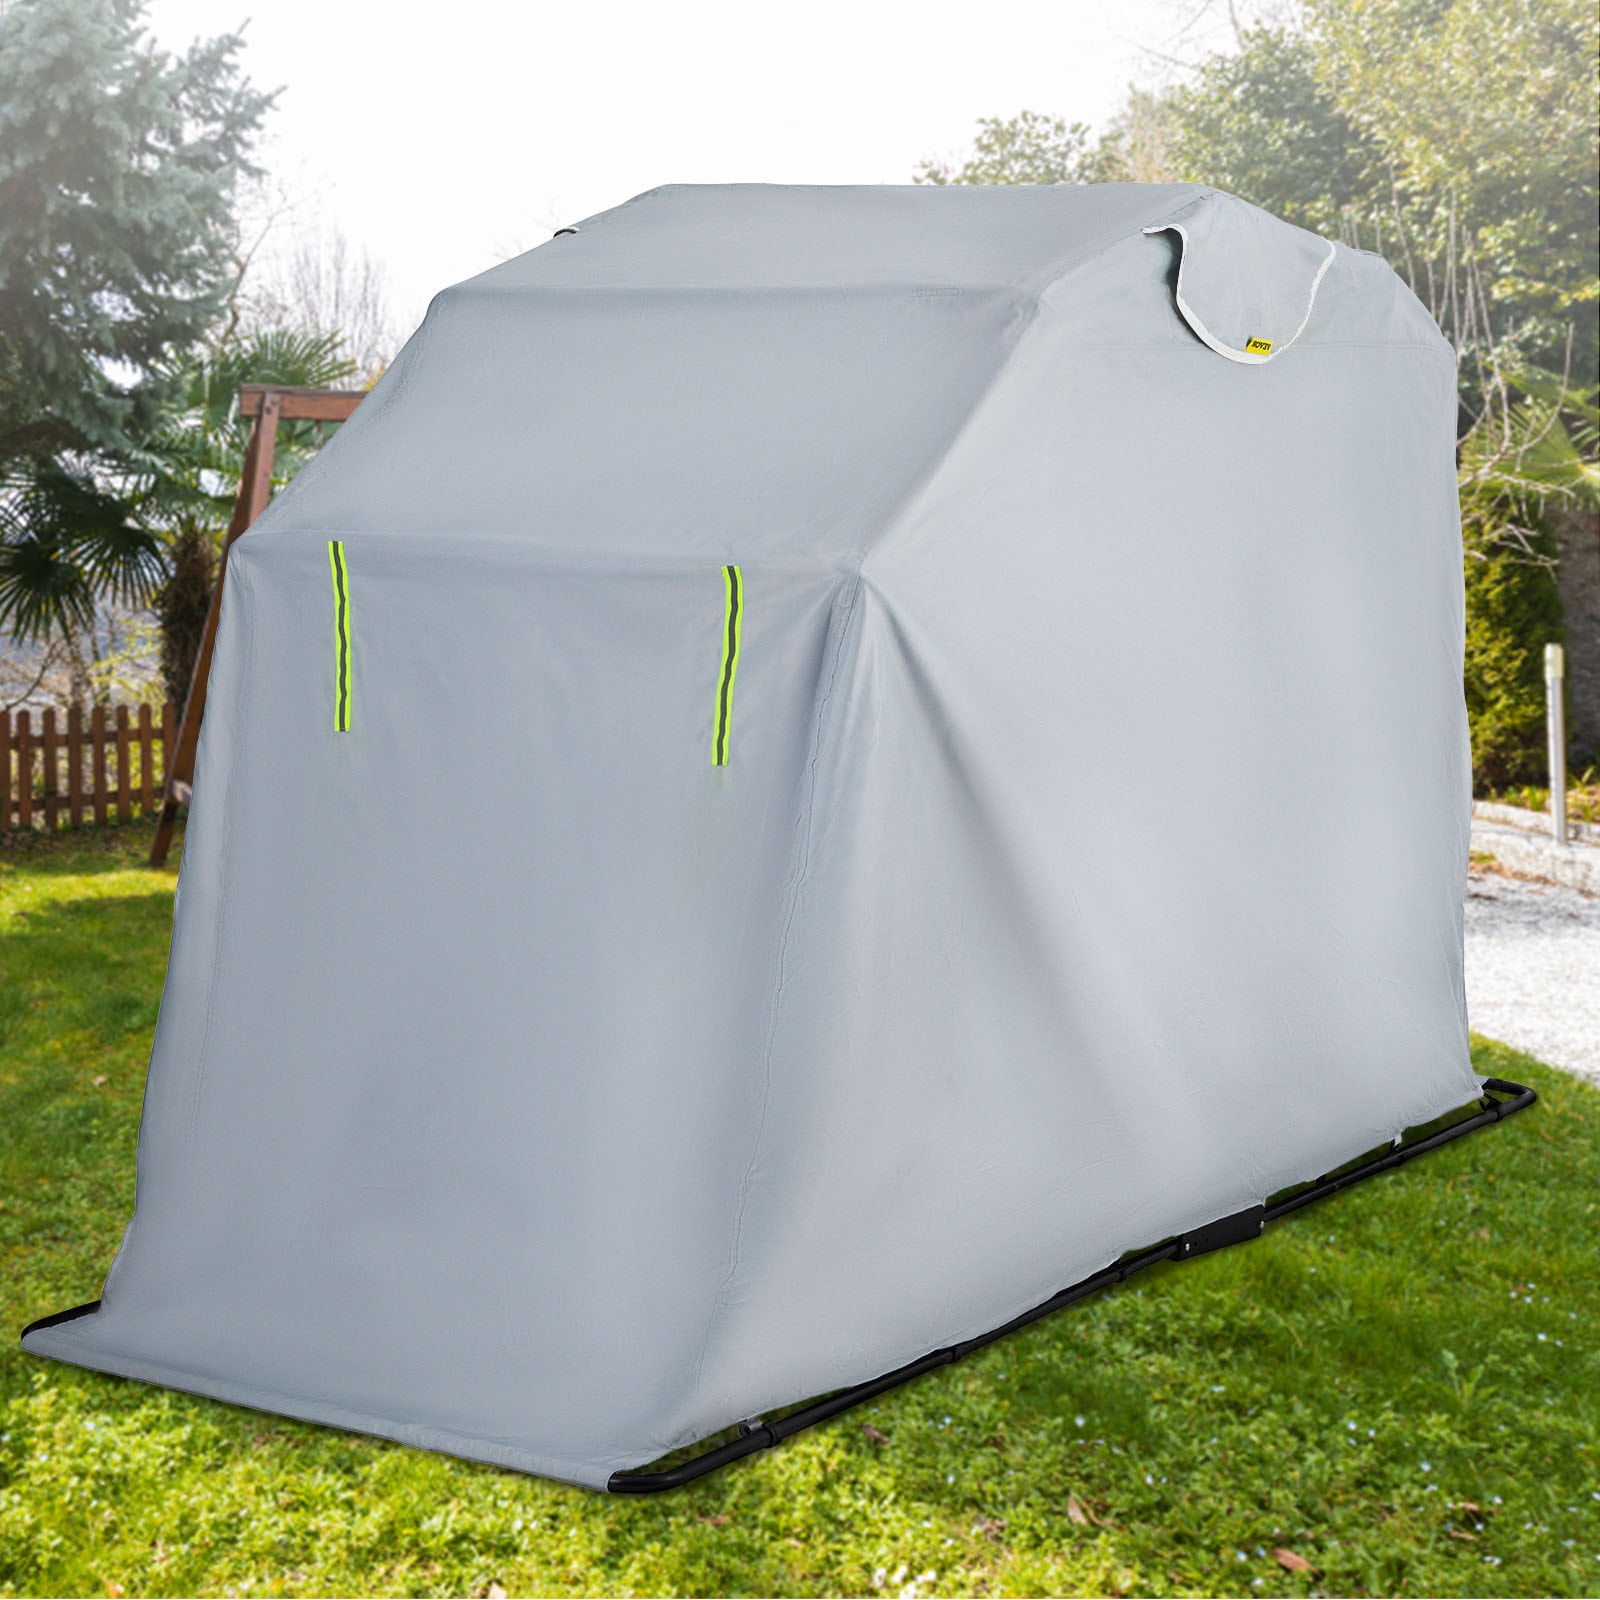 VEVORbrand Heavy Duty Motorcycle Storage Shed, Bike Scooter Cover Tent  Shelter, Portable Waterproof Outdoor Storage Garage, Anti-UV, 106 x 41 x  61